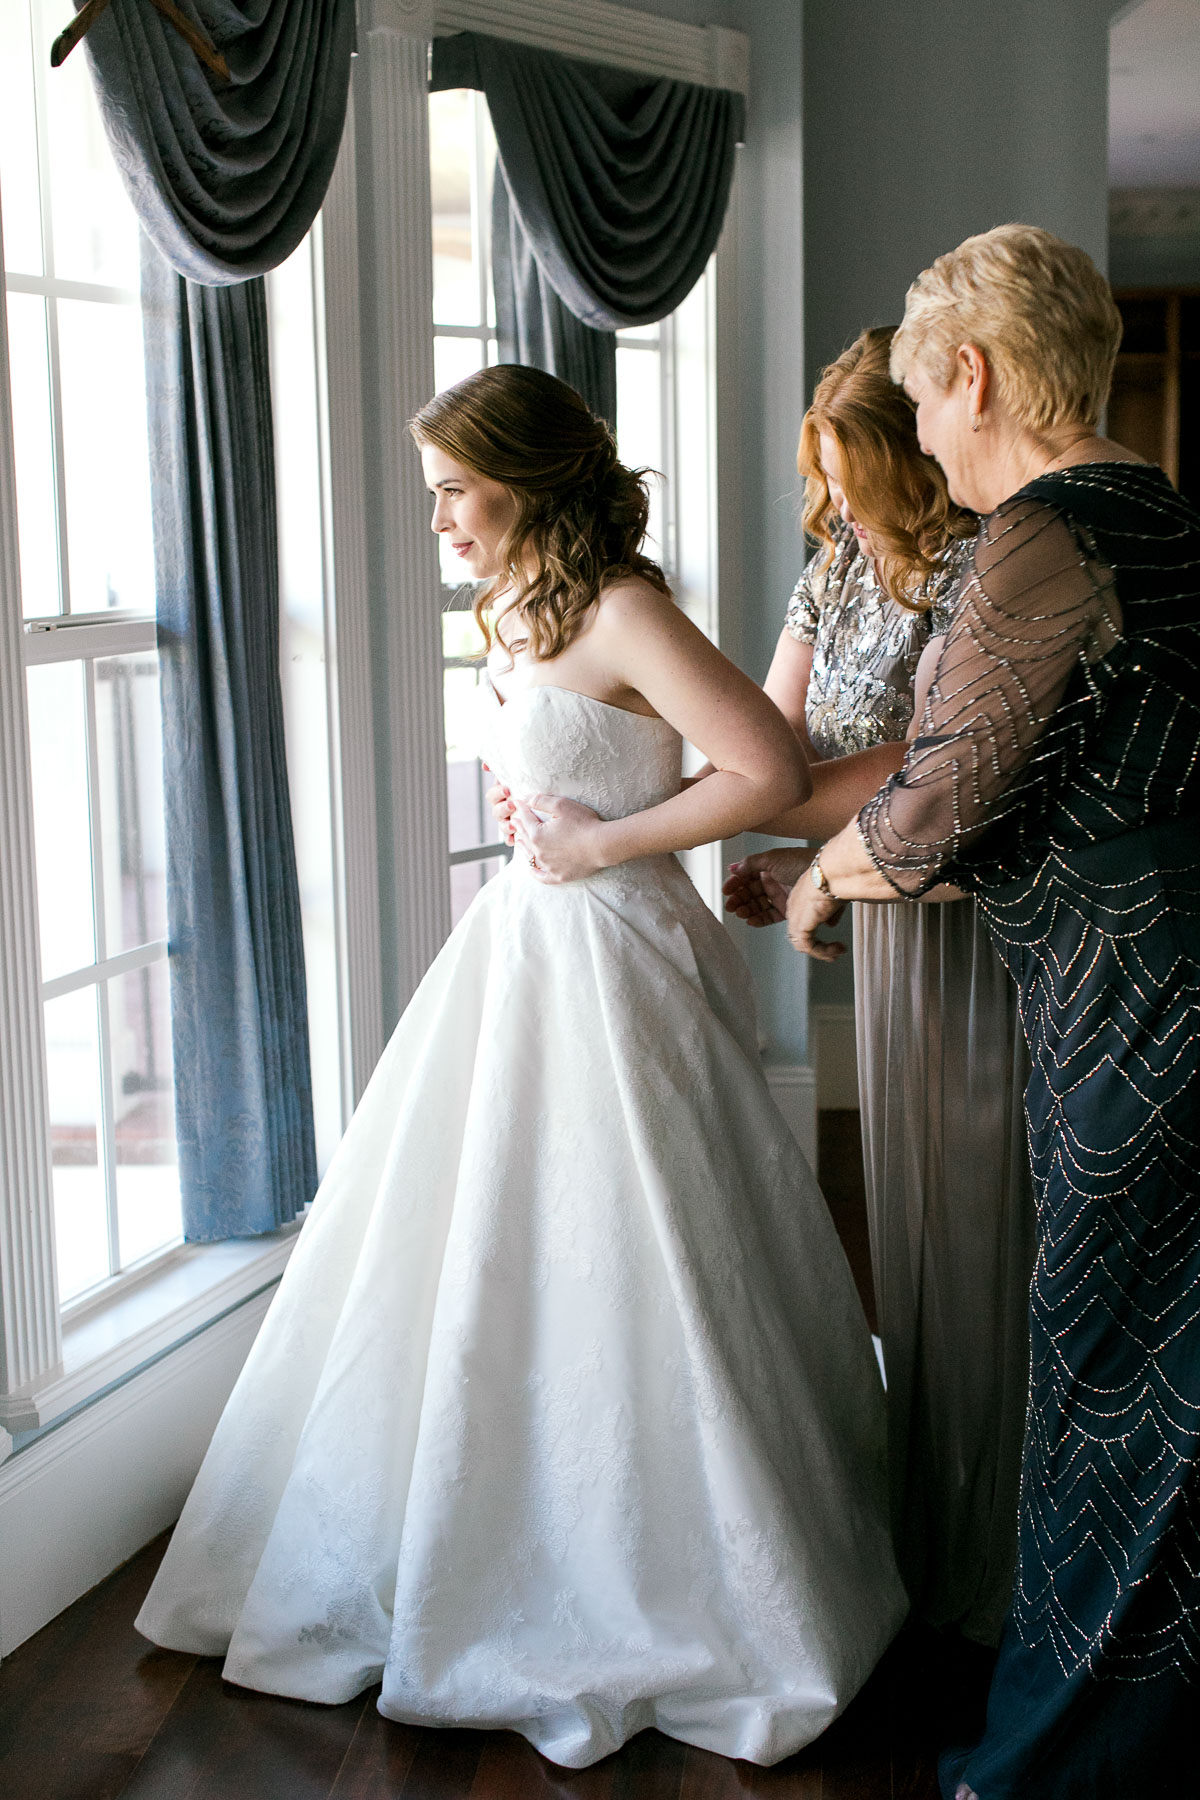 Bride's wedding party helping her into wedding dress by Justin Alexander